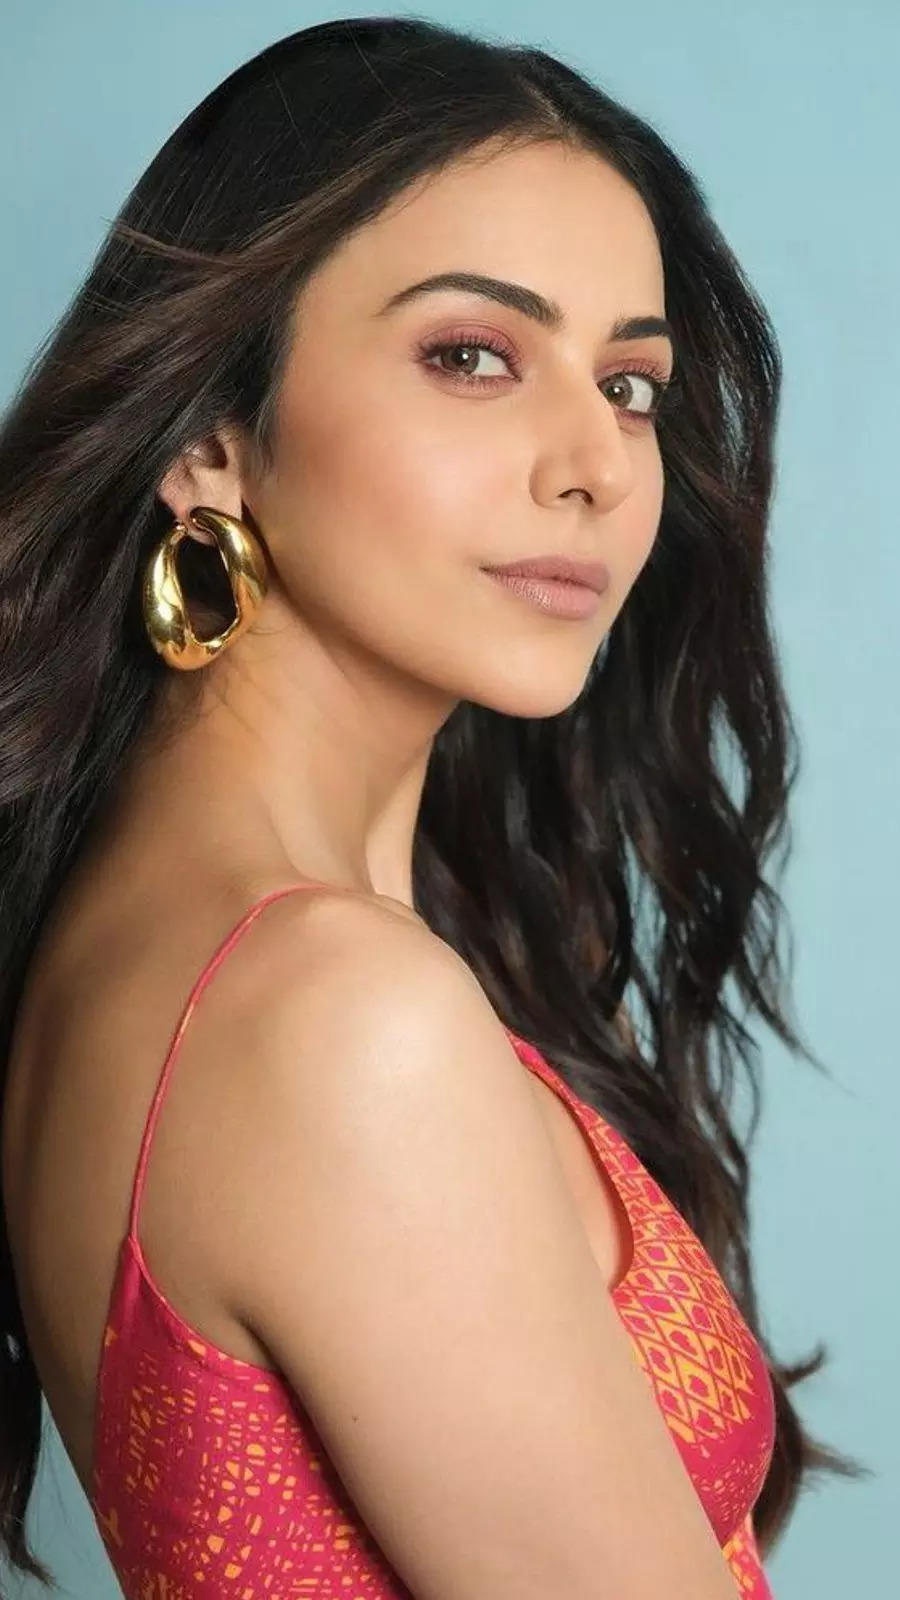 10 times Rakul Preet Singh dazzled in stylish outfits | Times of India